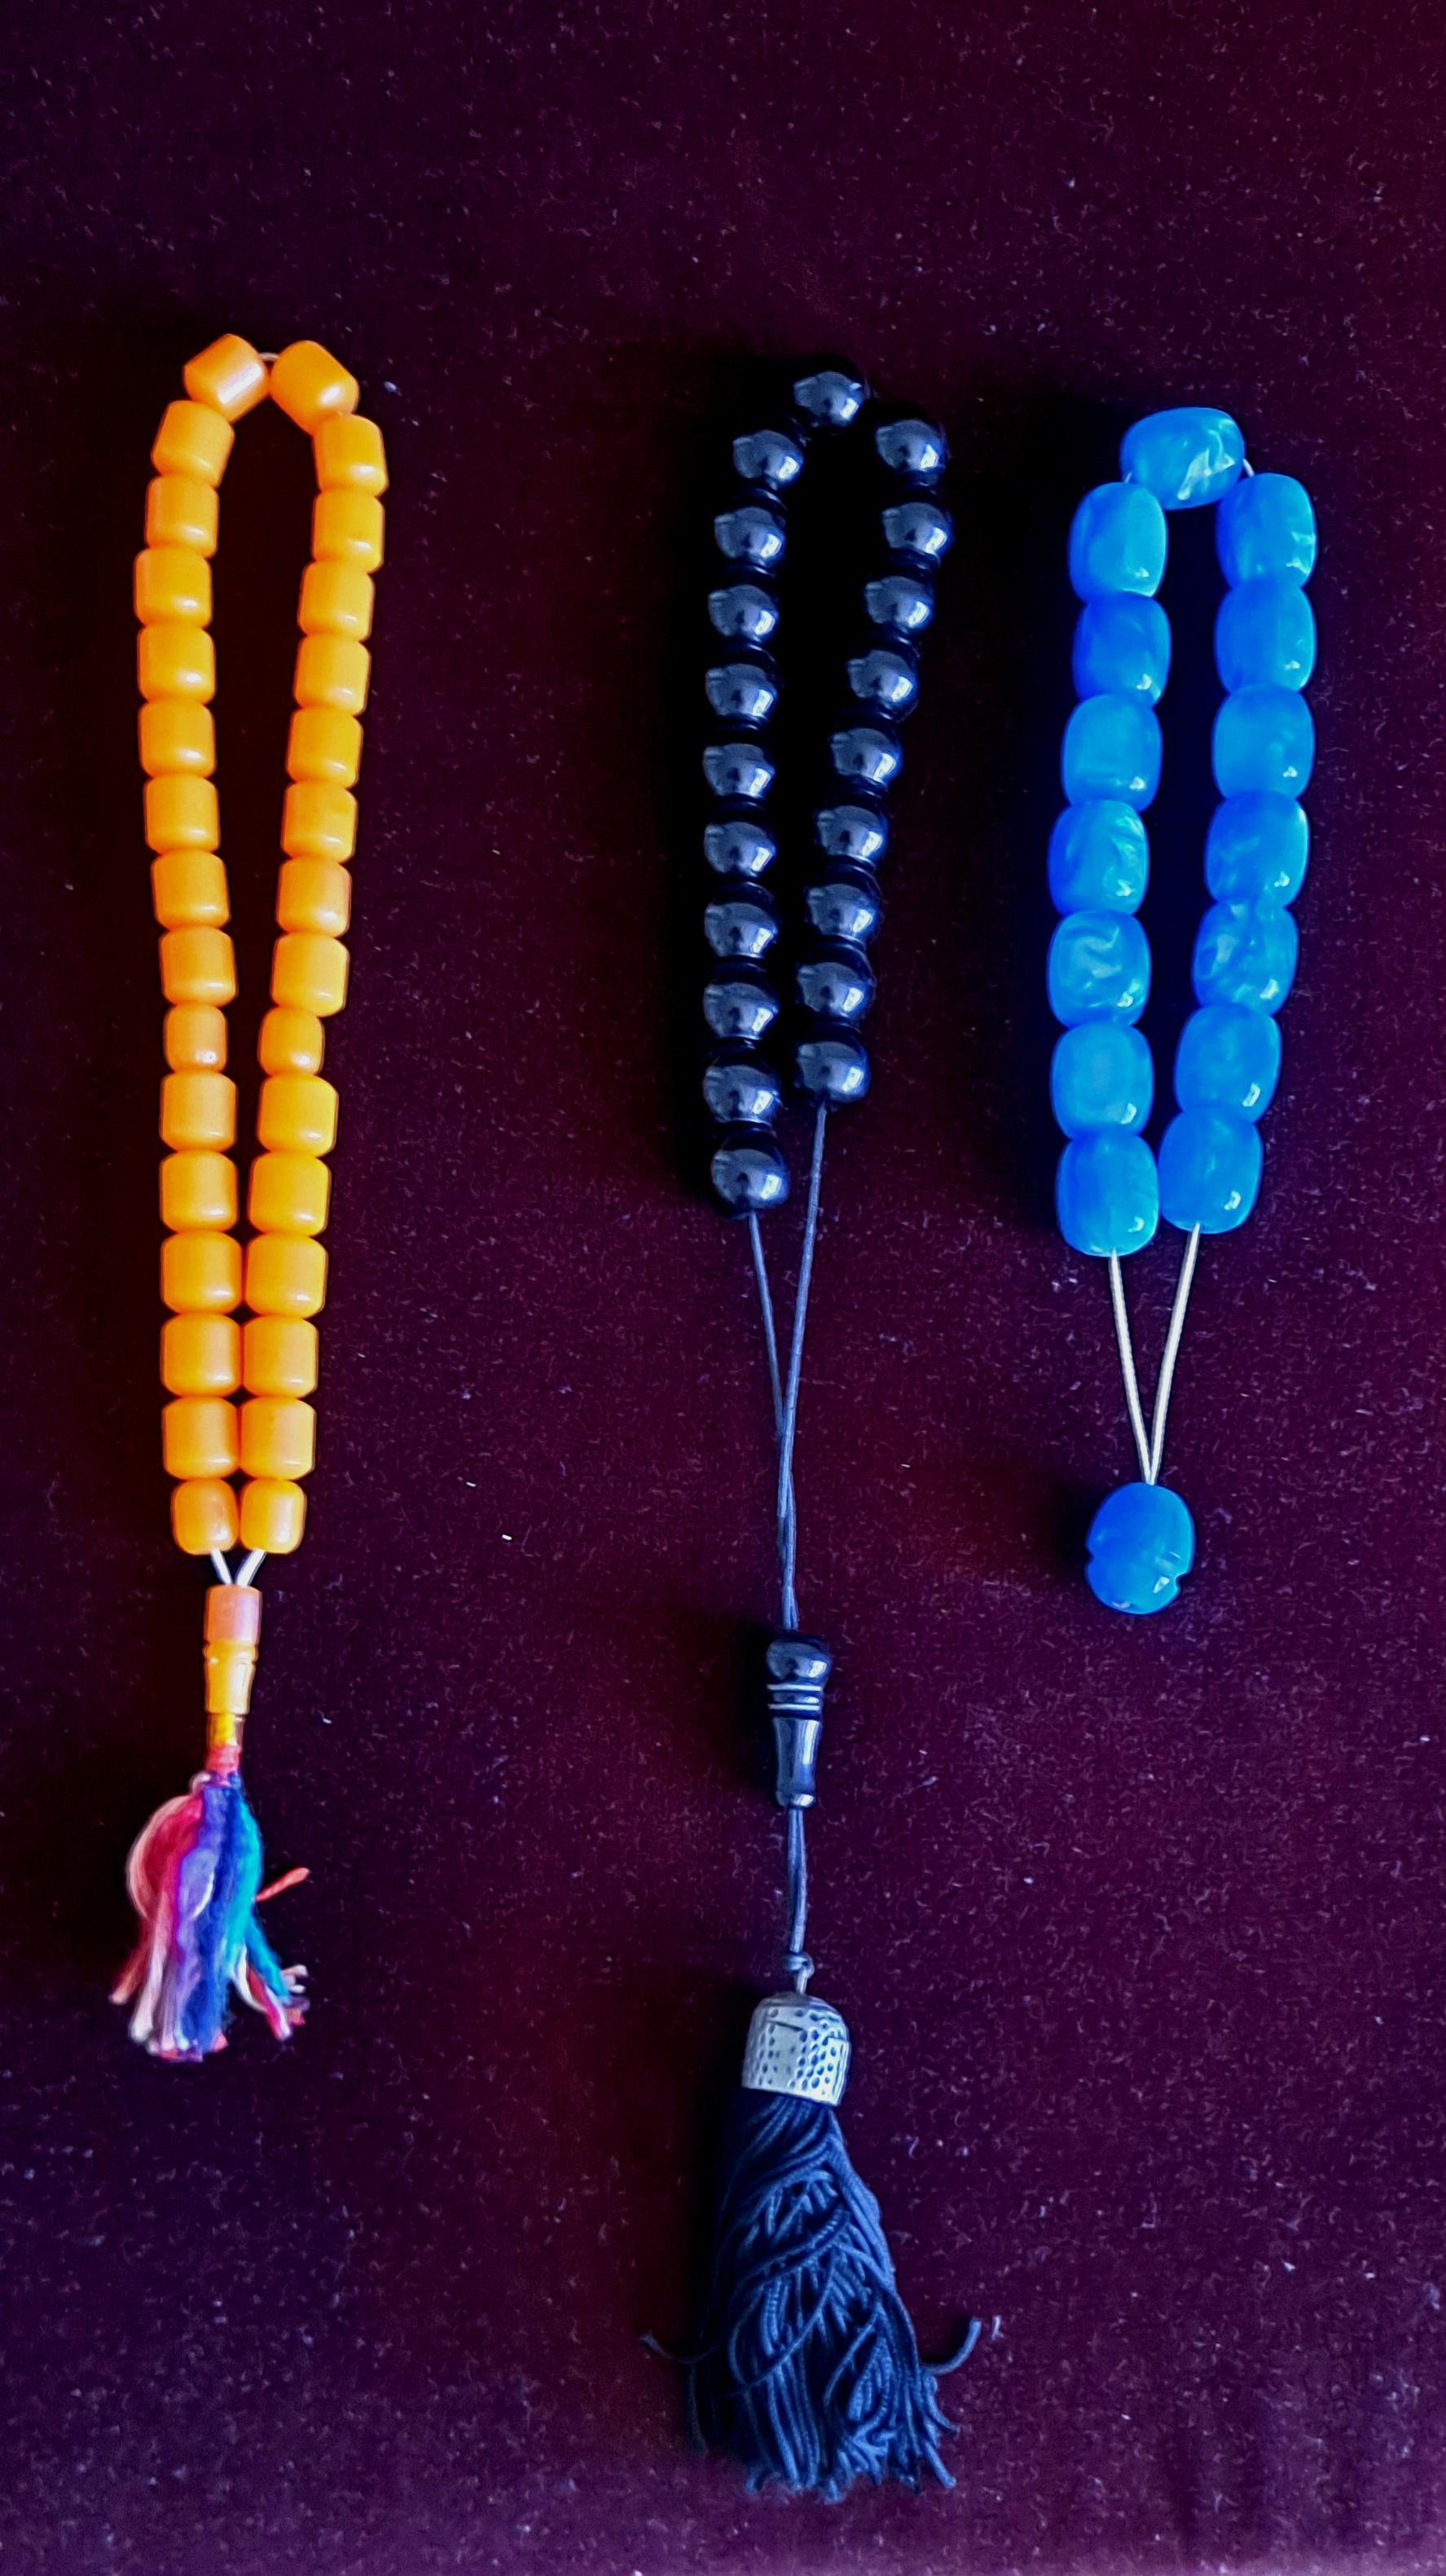  Antique Greek prayer beads, often referred to as 